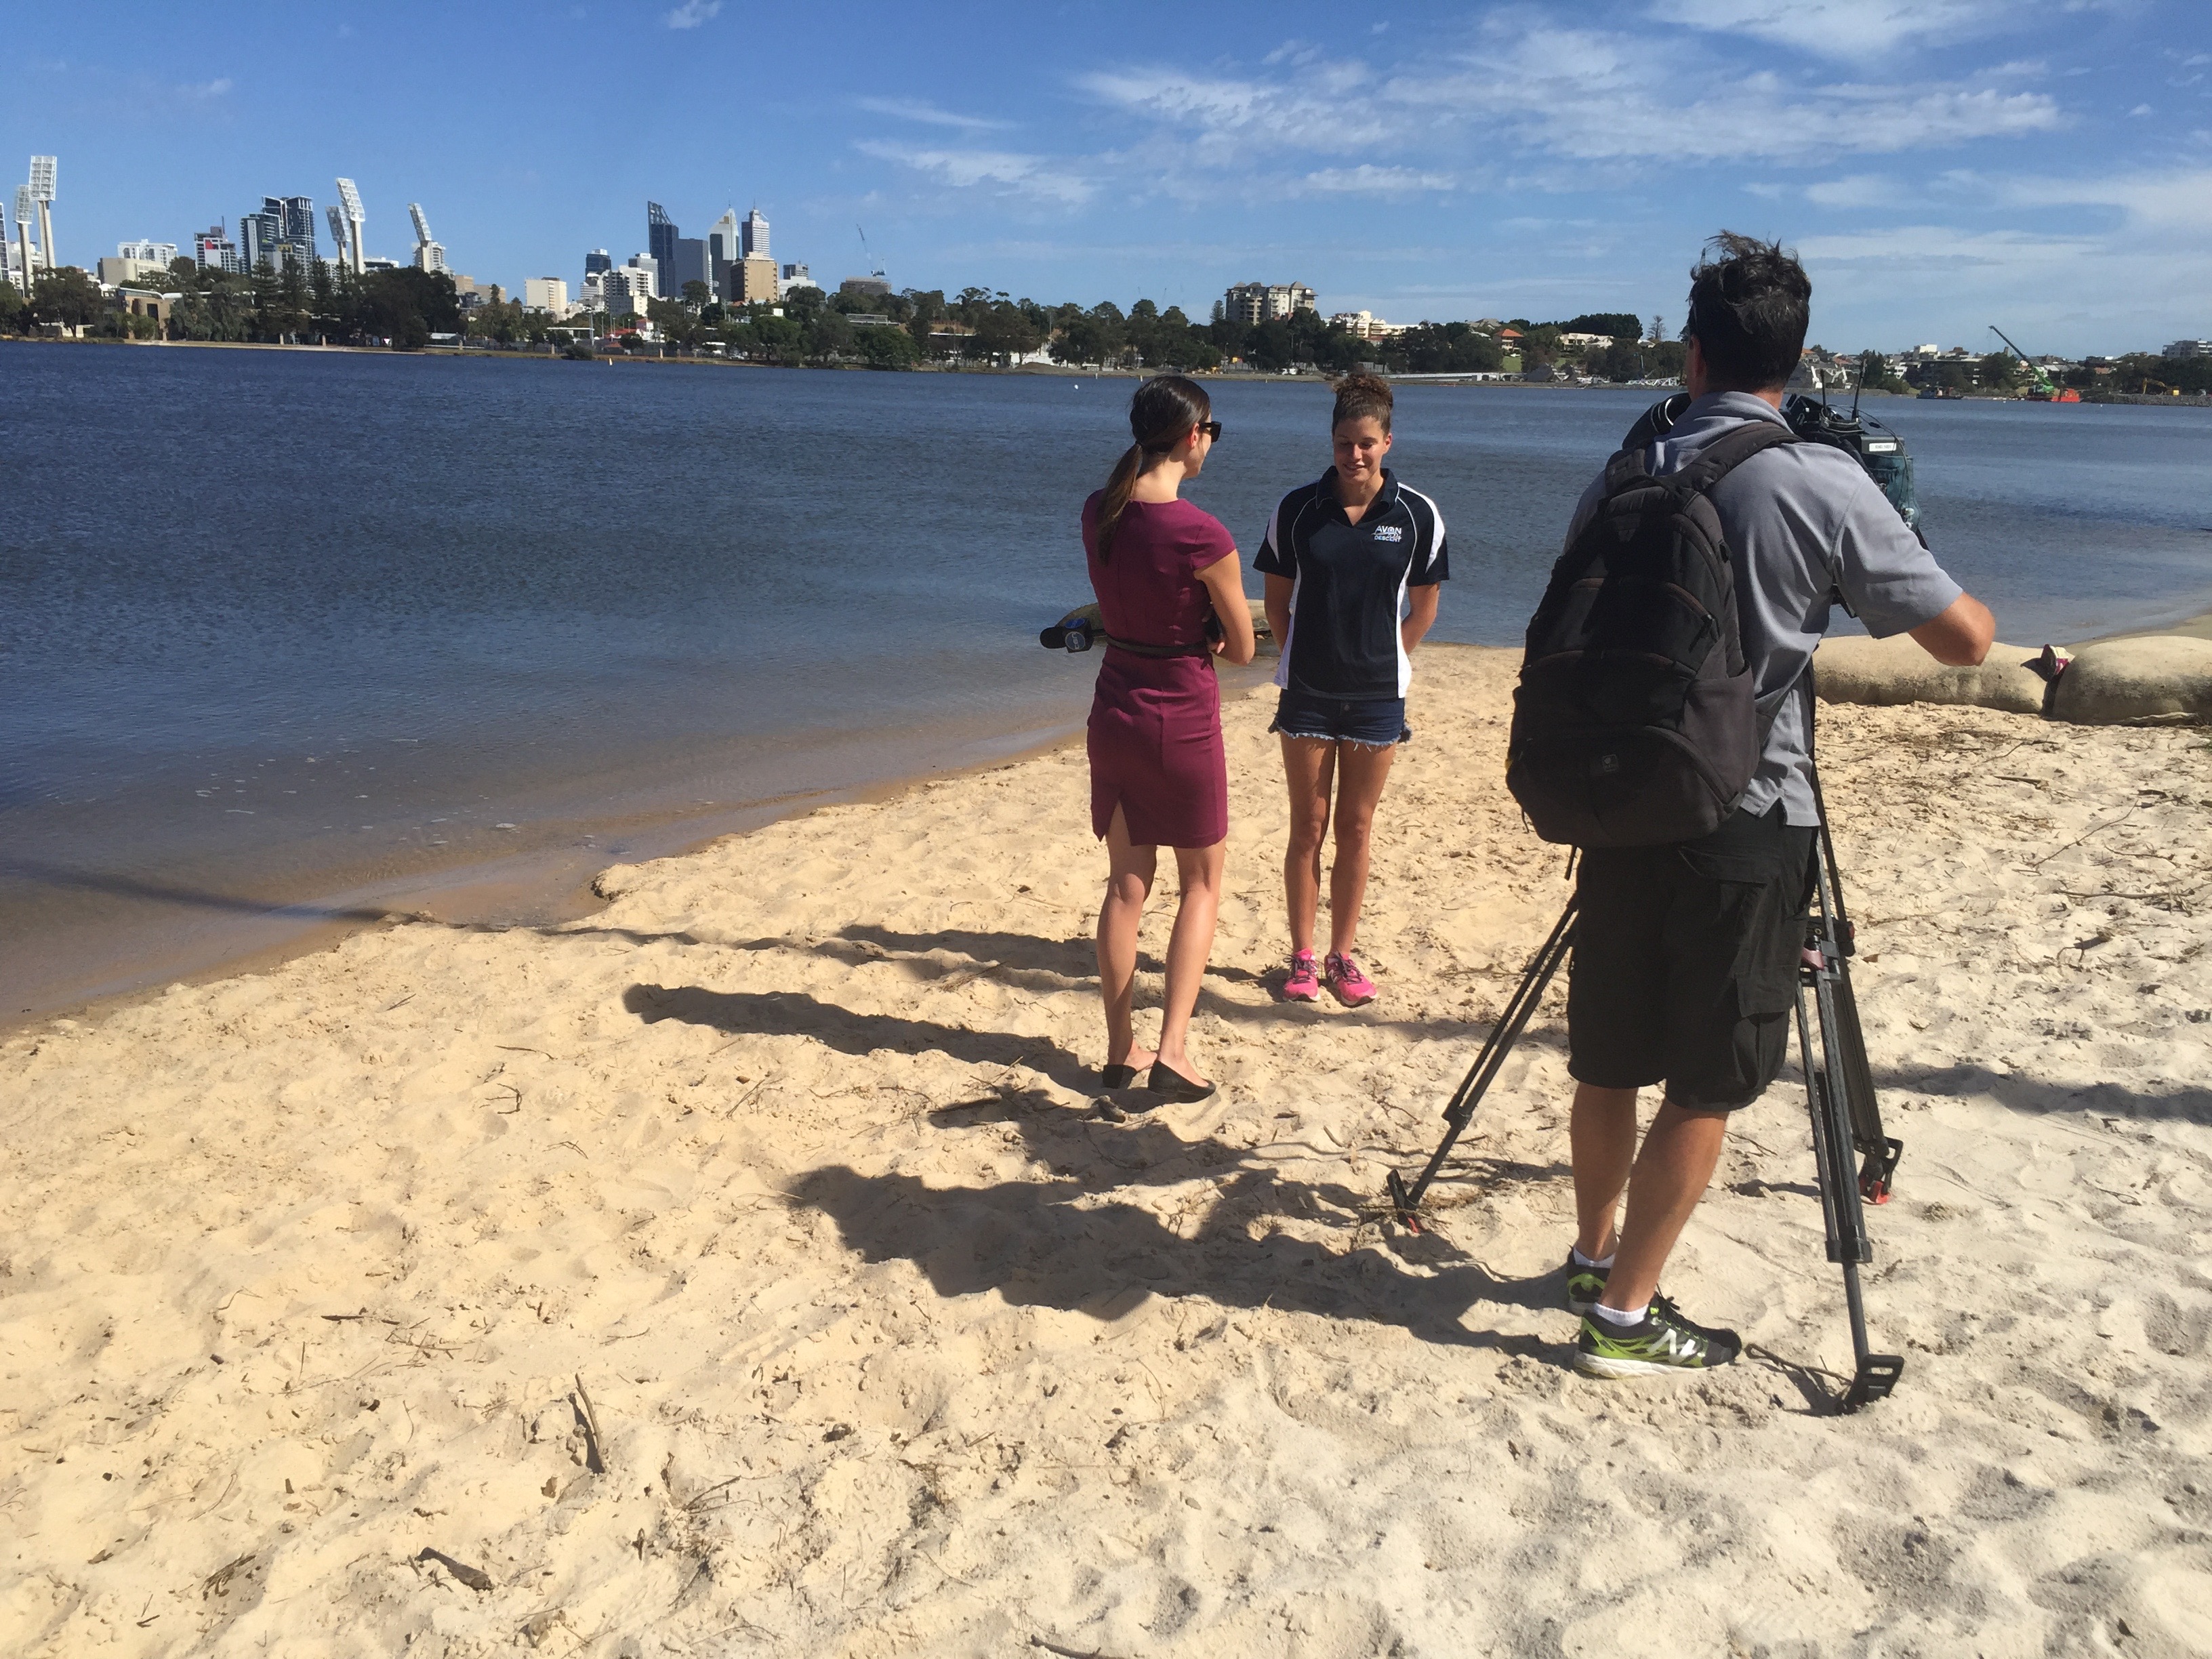 2018 Event Ambassador and paddle competitor Kiera Albertsen gives an interview